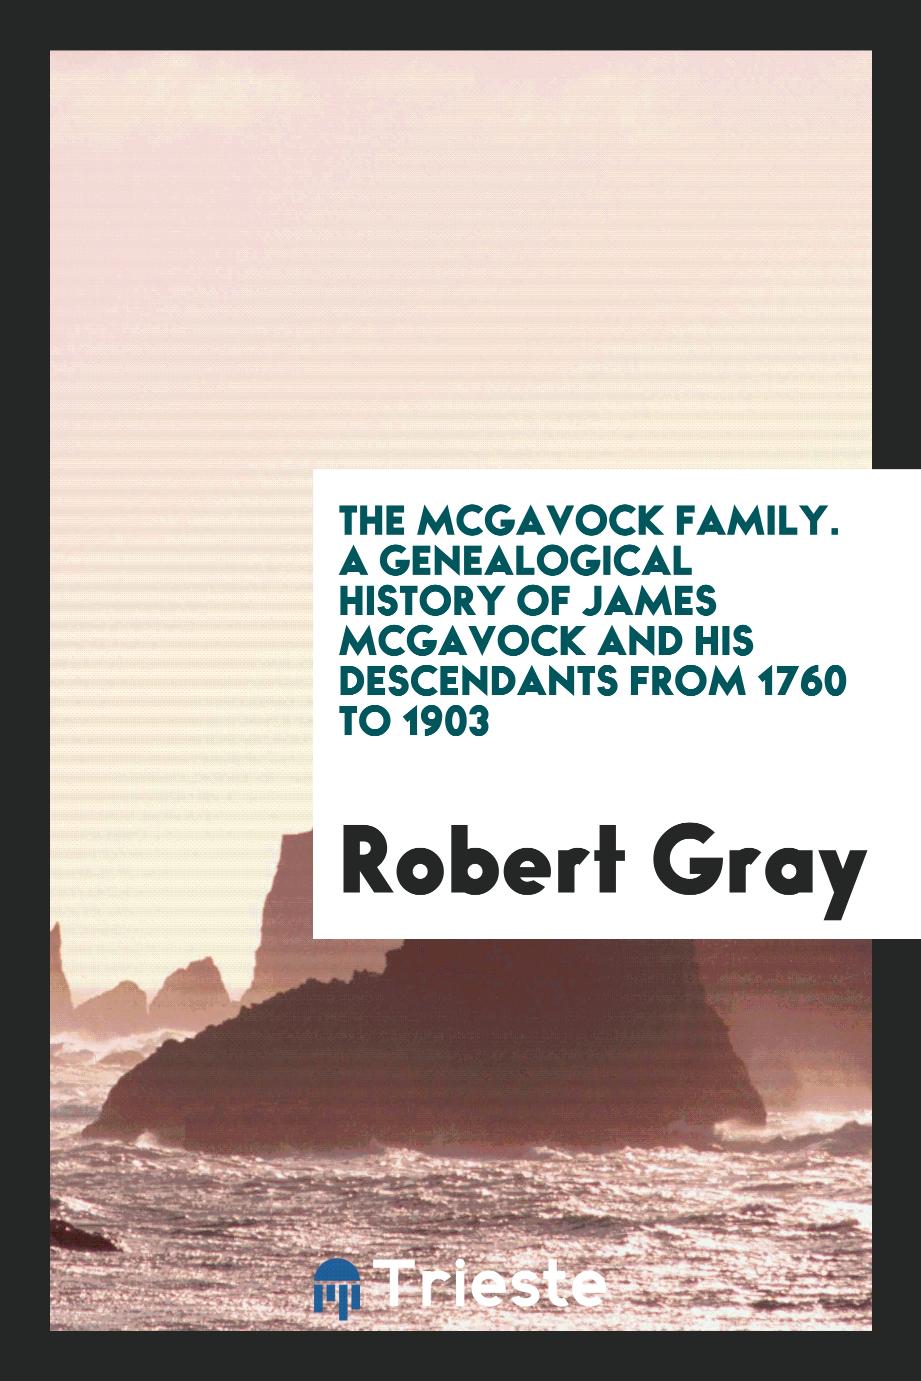 The McGavock Family. A Genealogical History of James McGavock and His Descendants from 1760 to 1903